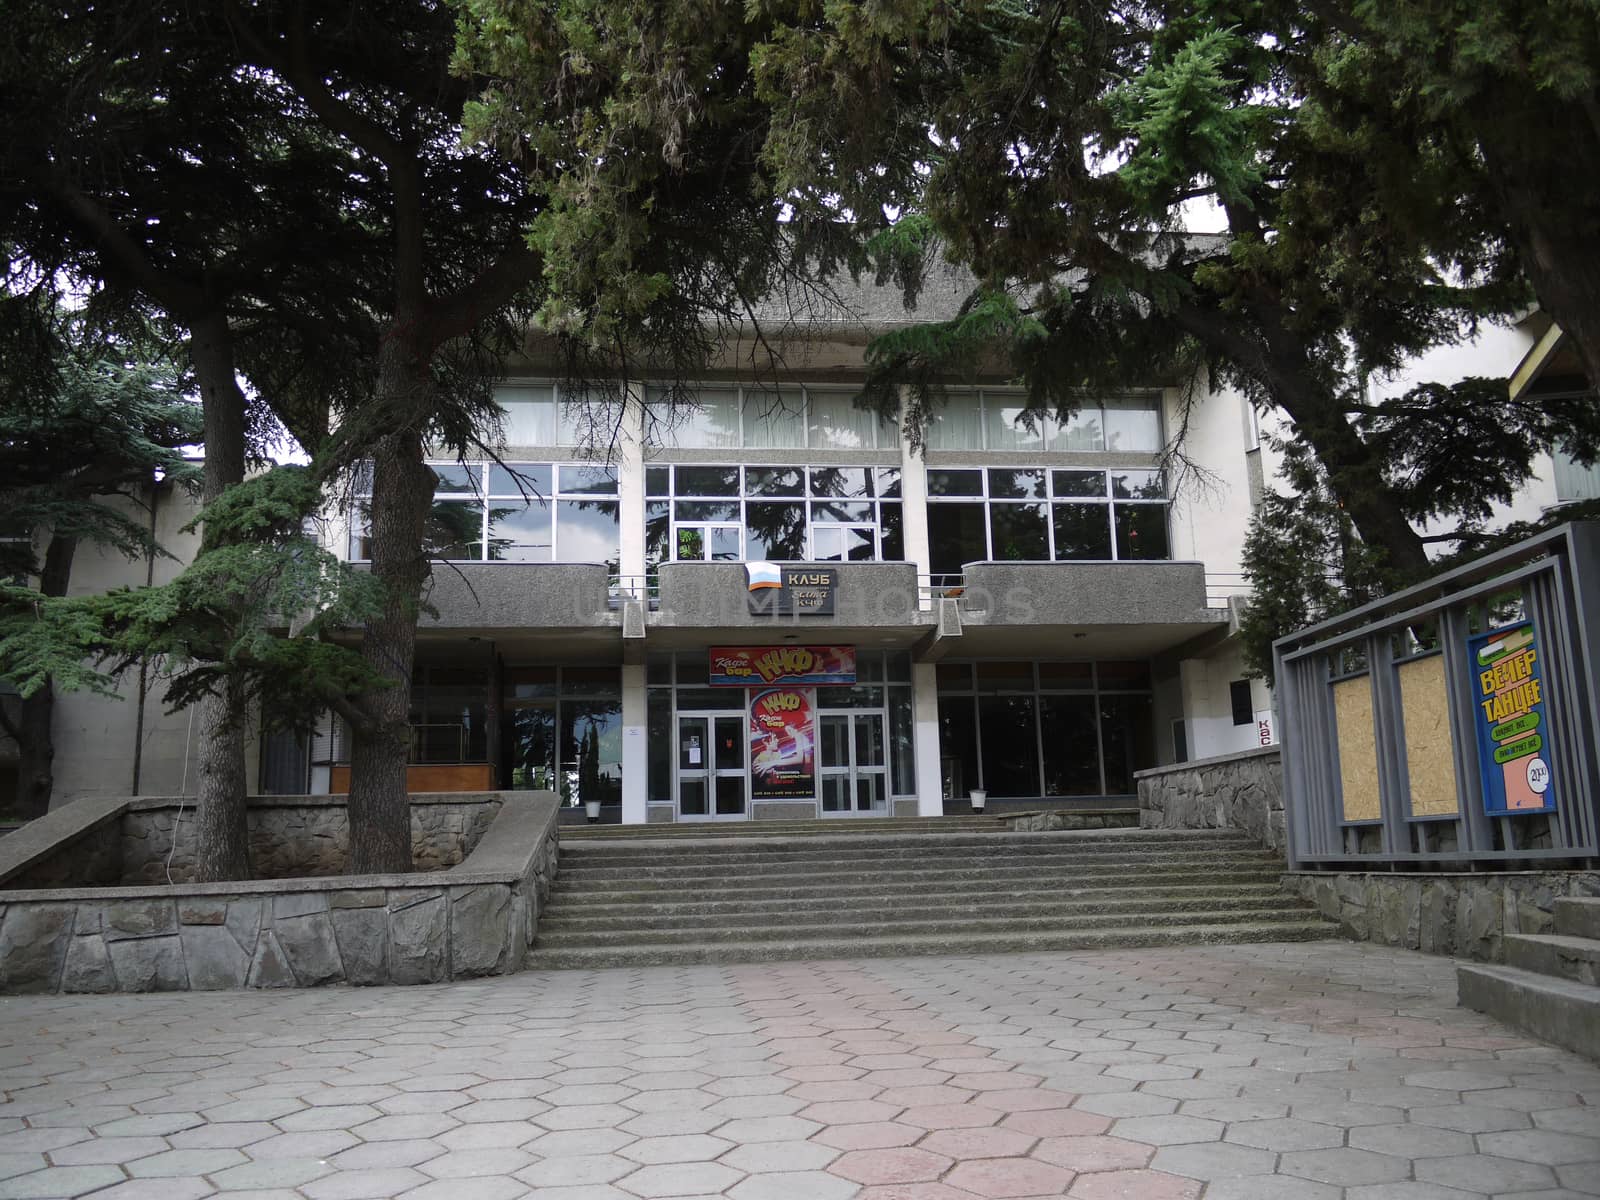 Coniferous trees above the entrance to the two-storeyed house of culture with posters, stairs and a platform in front of the entrance